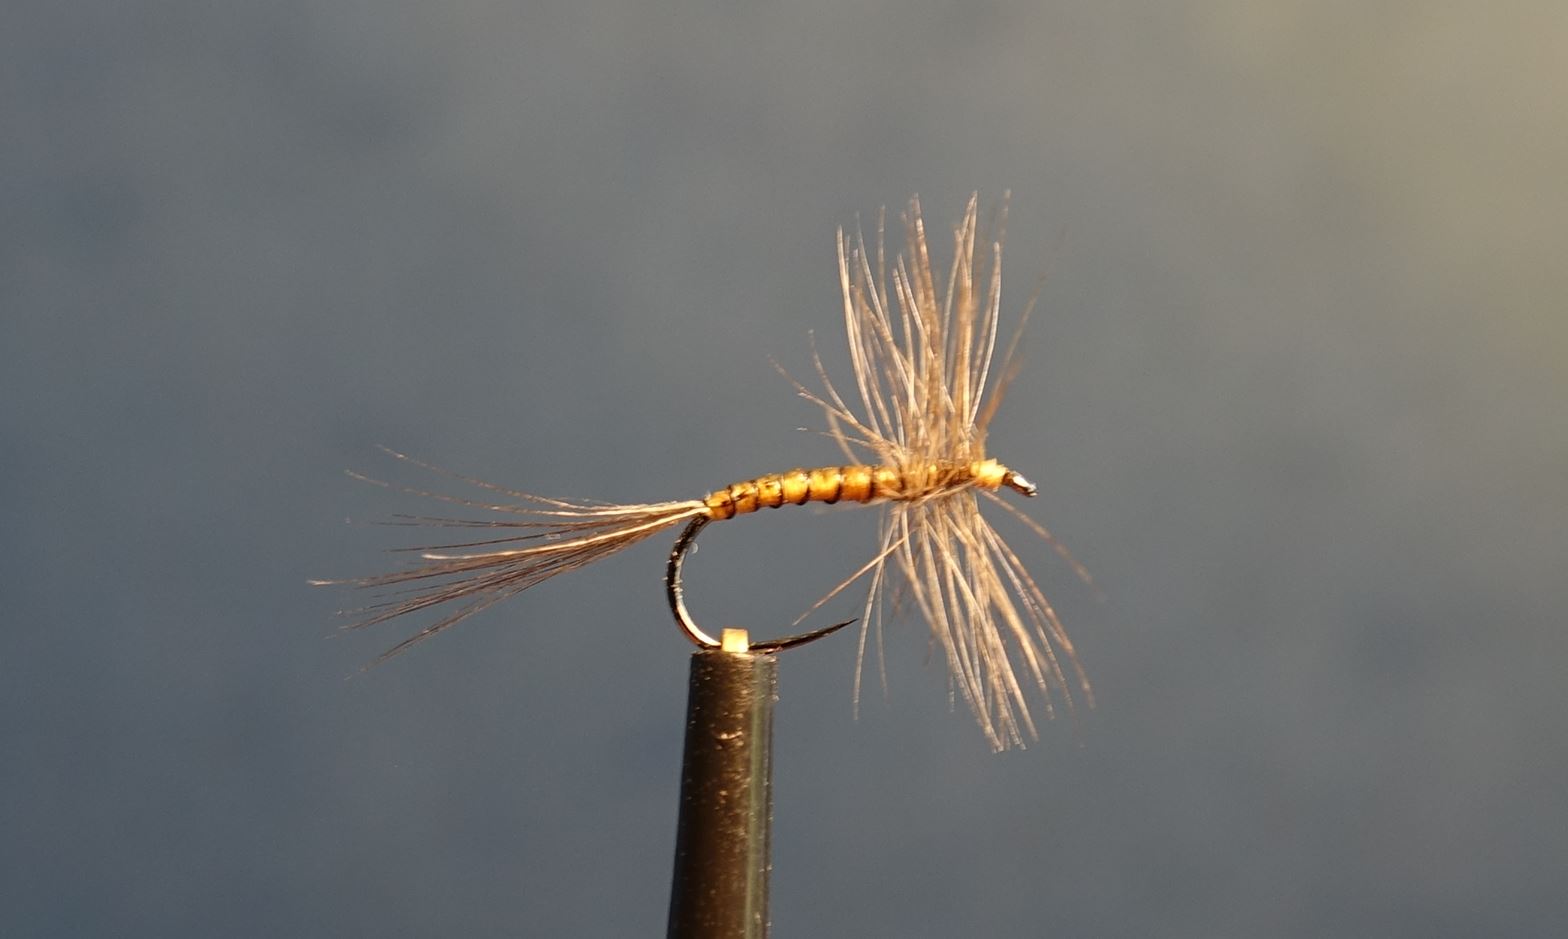 Araignée spider mouche dry fly flytying eclosion limousin rooster hackle coq eclosion